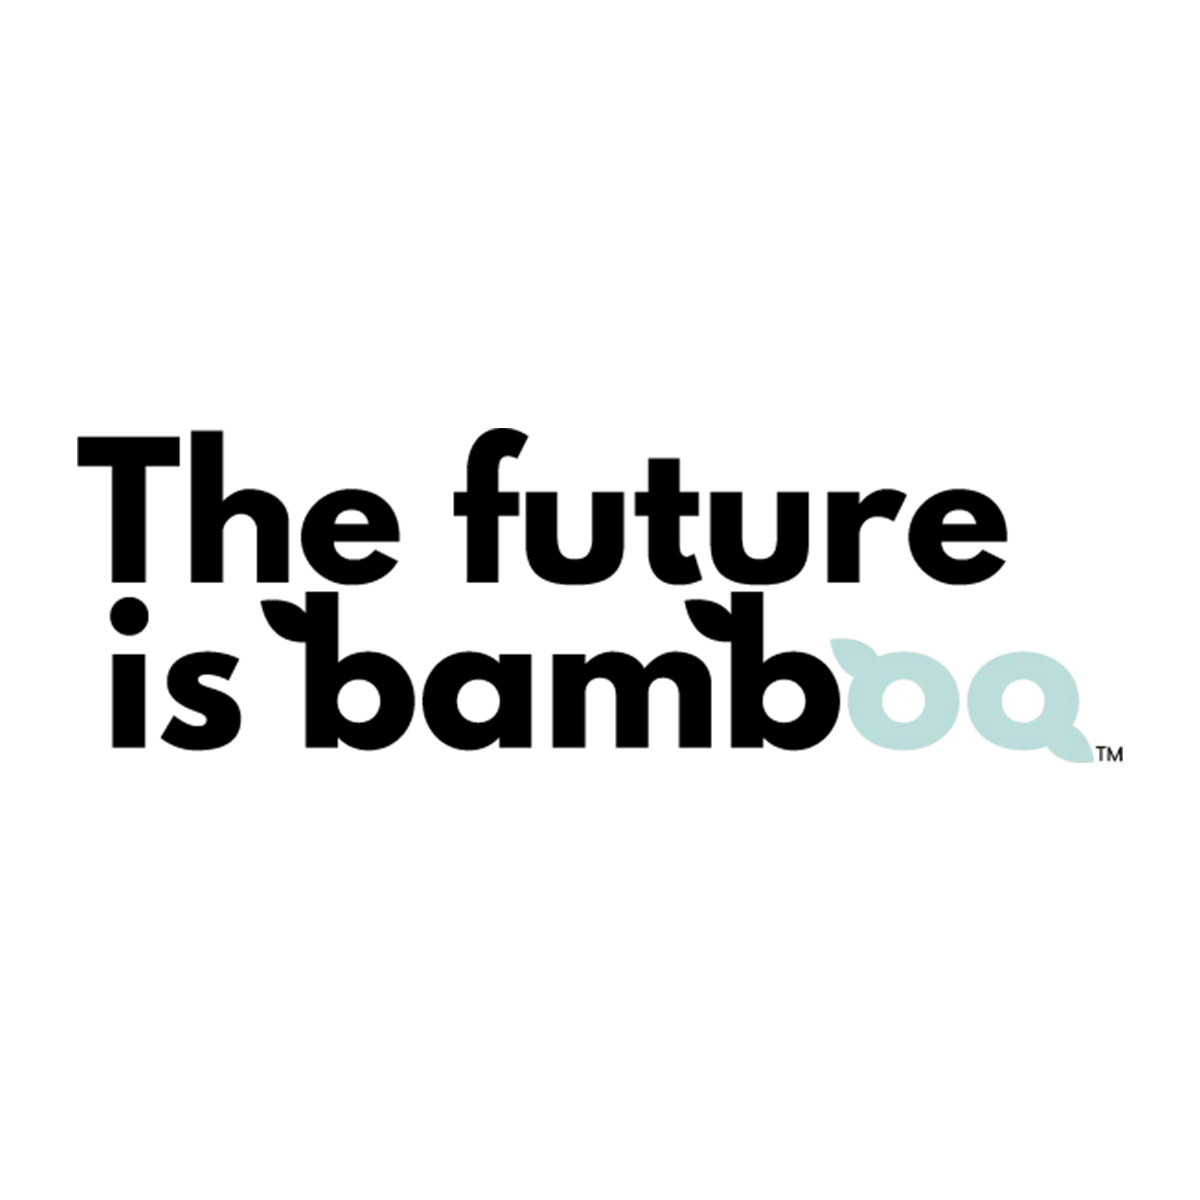 The future is bamboo